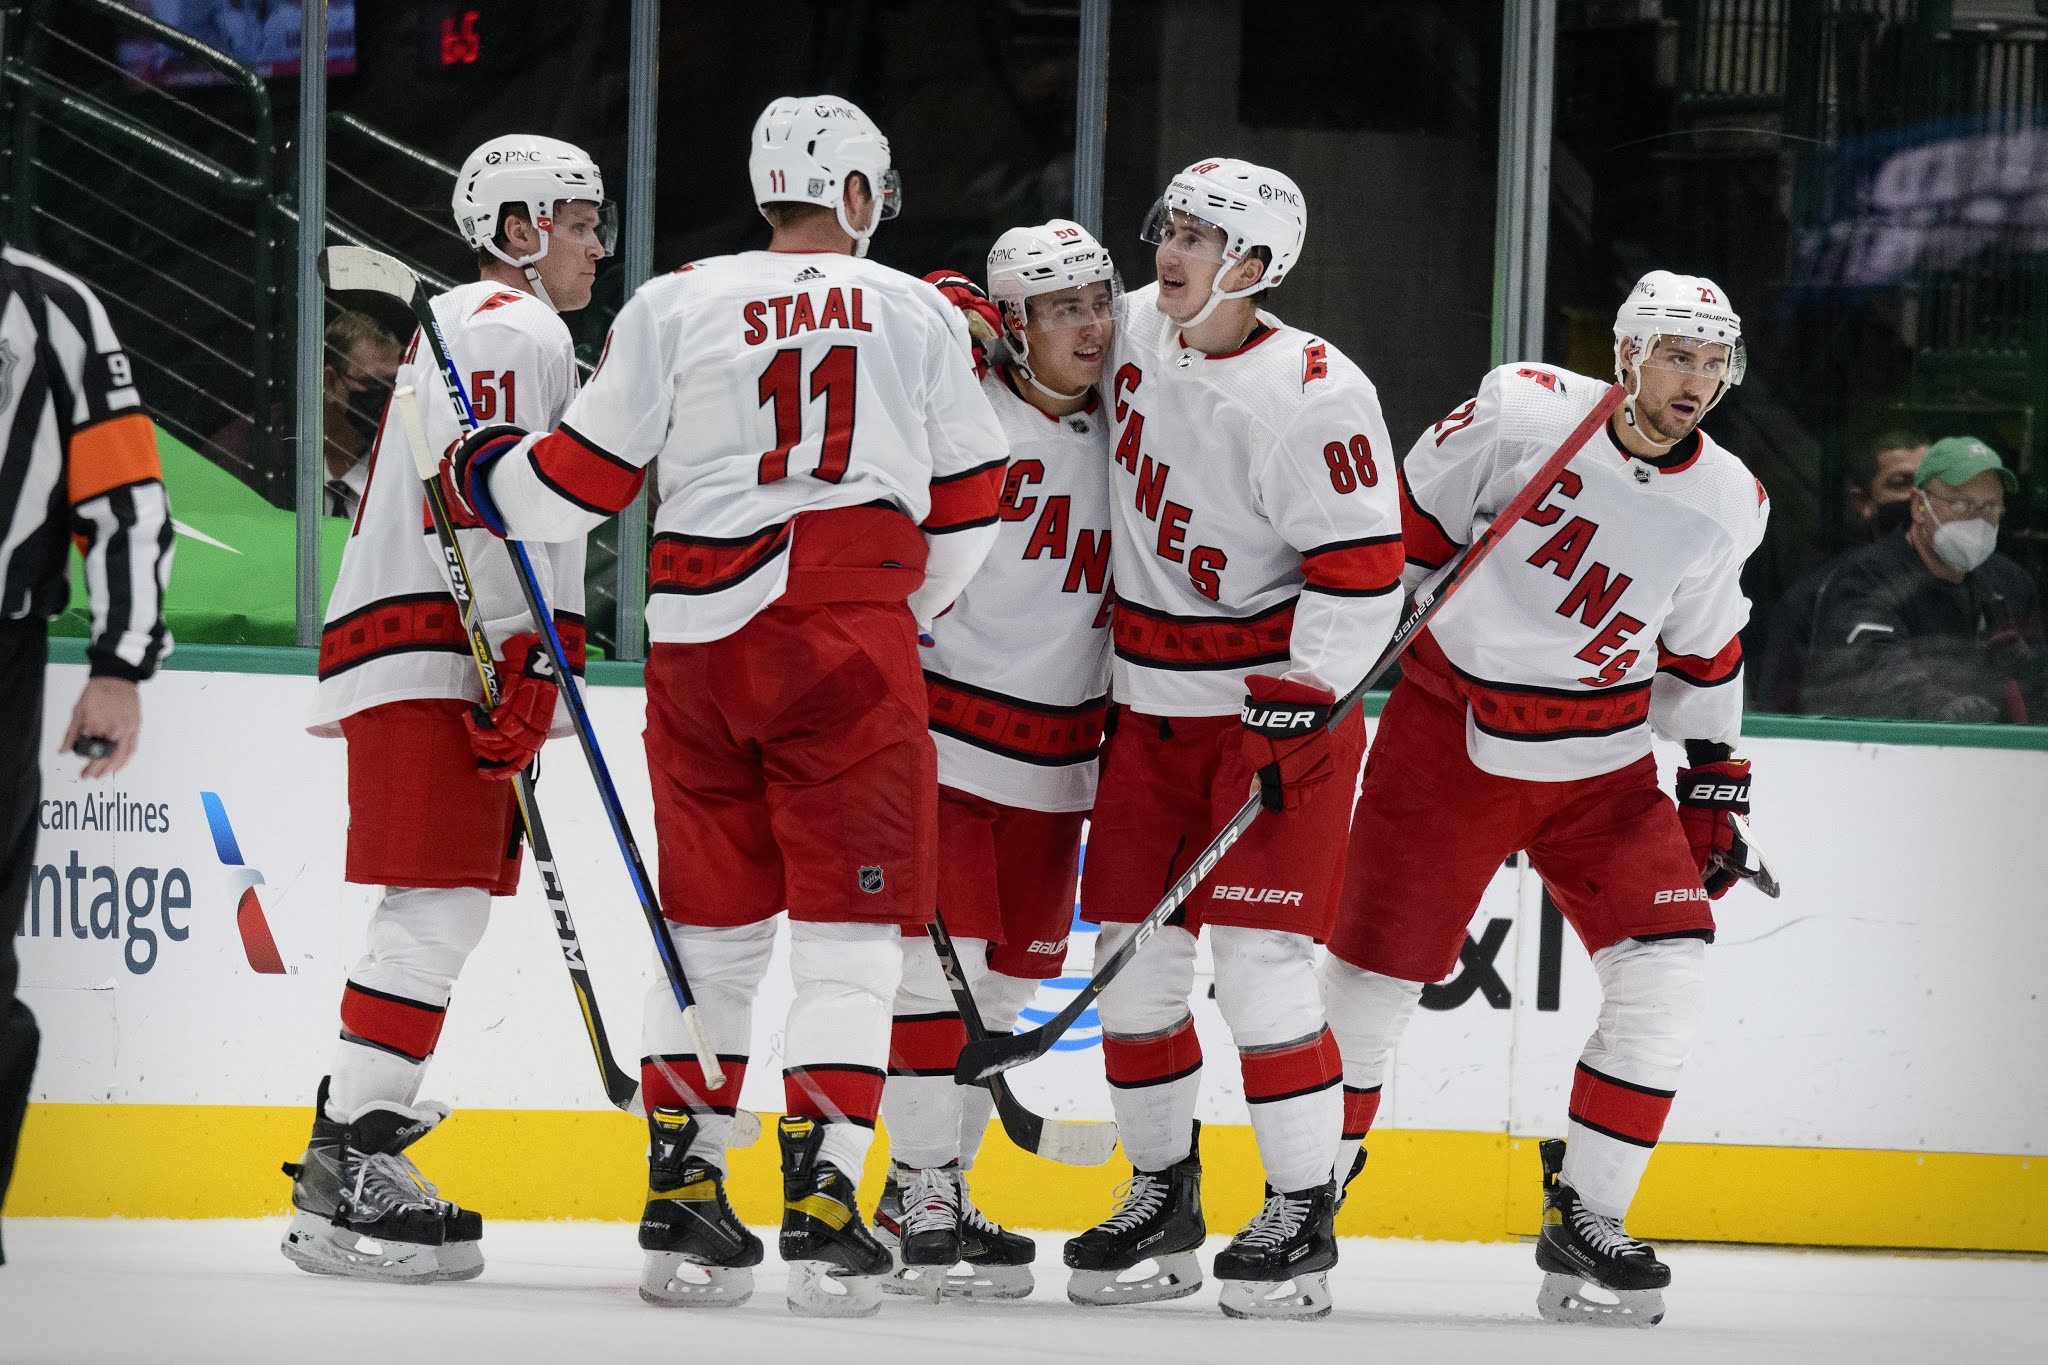 Carolina Hurricanes: 2 Players Expected to be Traded Next - NHL Trade ...